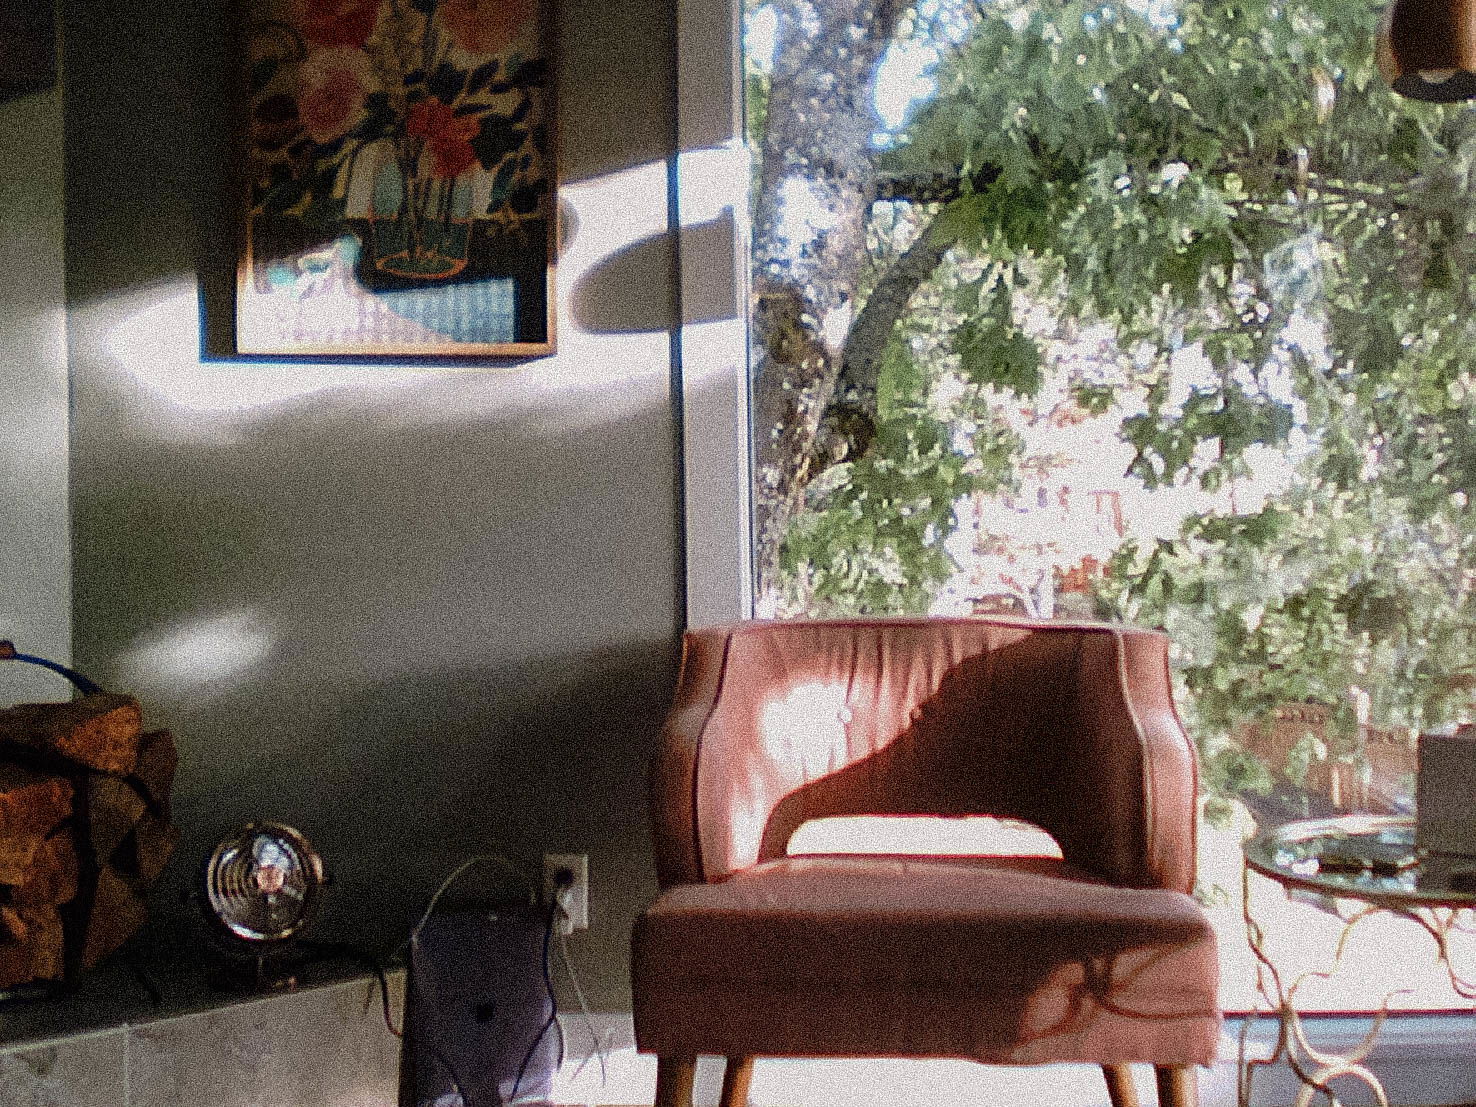 A cozy corner of a room with a pink chair, a framed floral painting on the wall, logs of firewood, and a view of green trees through the window with sunlight streaming in.